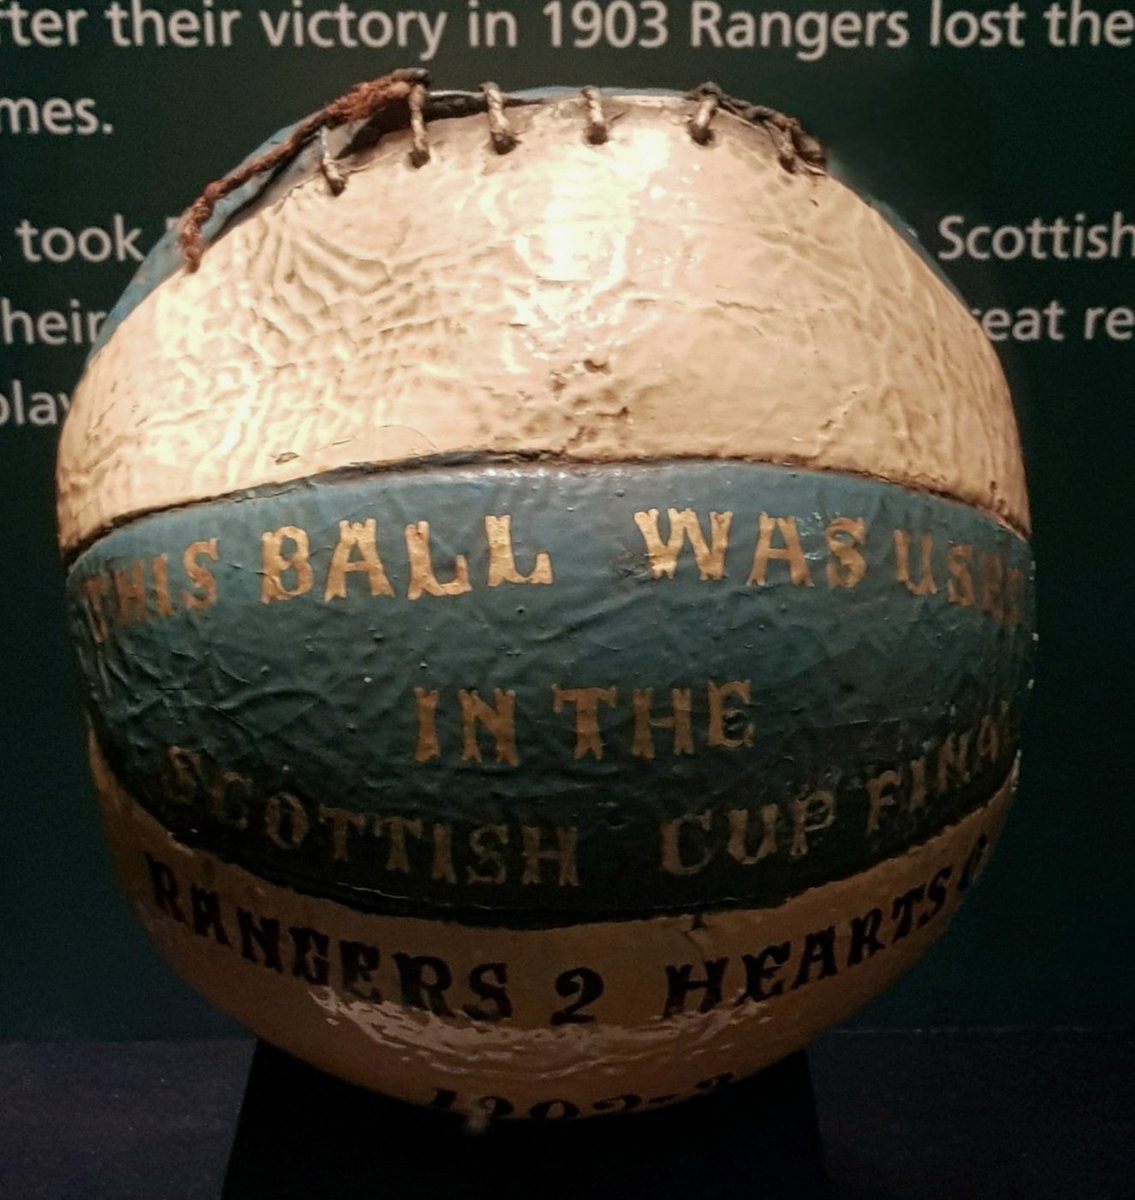 🗓️ #OnThisDay 1️⃣9️⃣0️⃣3️⃣ : #Rangers win our 4th Scottish Cup, beating Hearts 2-0 in a 2nd replay, all 3 matches were played at Parkhead. Alec Mackie & RC Hamilton scored. We played with 10 men after Jock Drummond went off injured.[📷 The match ball is displayed at @SFootballMuseum]